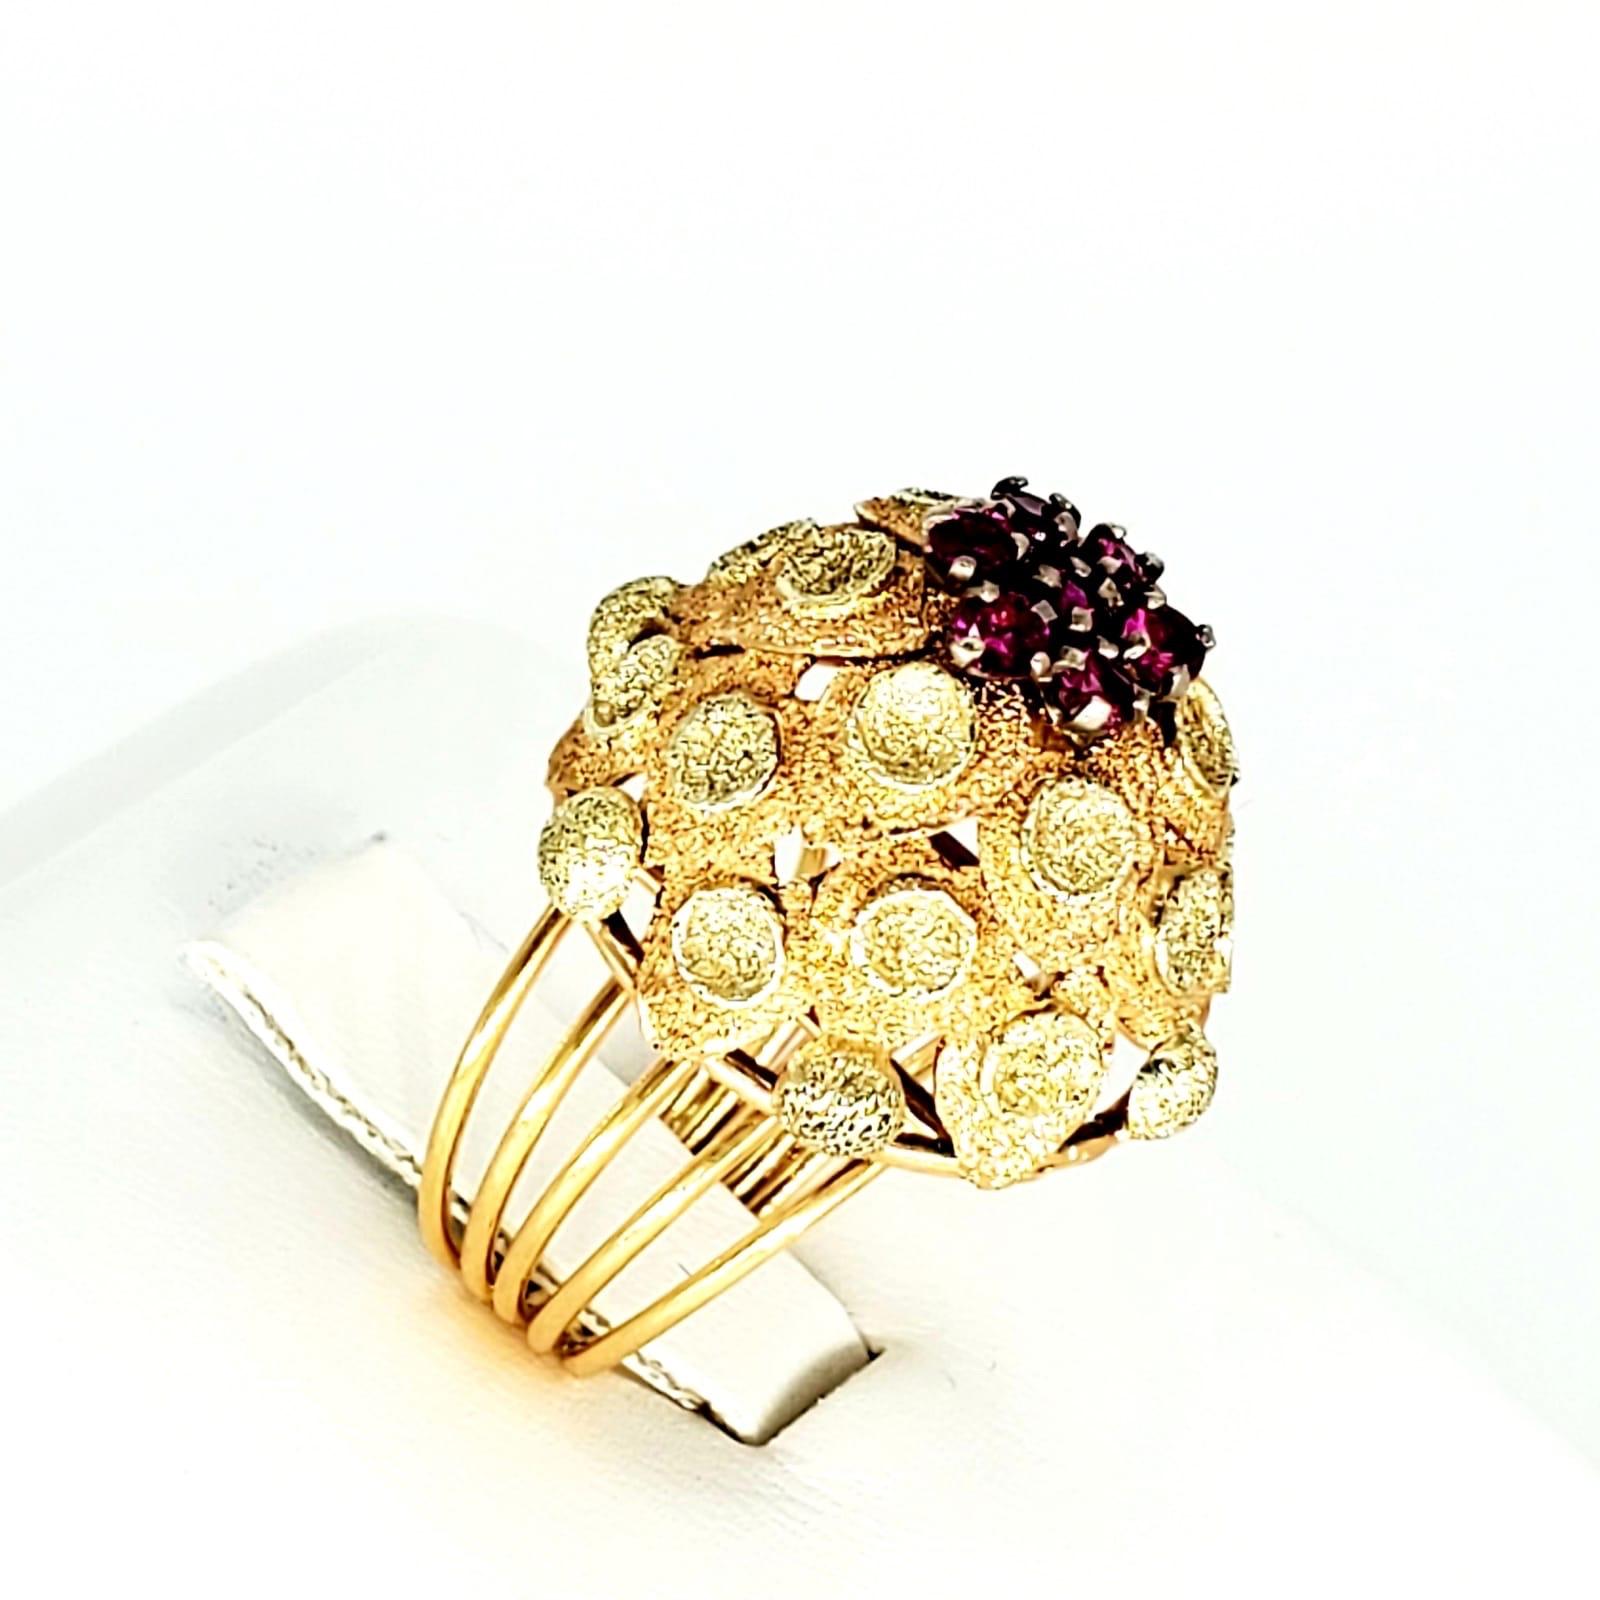 Retro 0.70 Carat Ruby Bombay Style Cocktail 18k Gold Ring. This ring is a one of a kind Bombay style ring thats amazingly designed and crafted in style of a leave/flower. The features approx 0.70 carat Ruby’s and is make of 18k solid gold. The ring